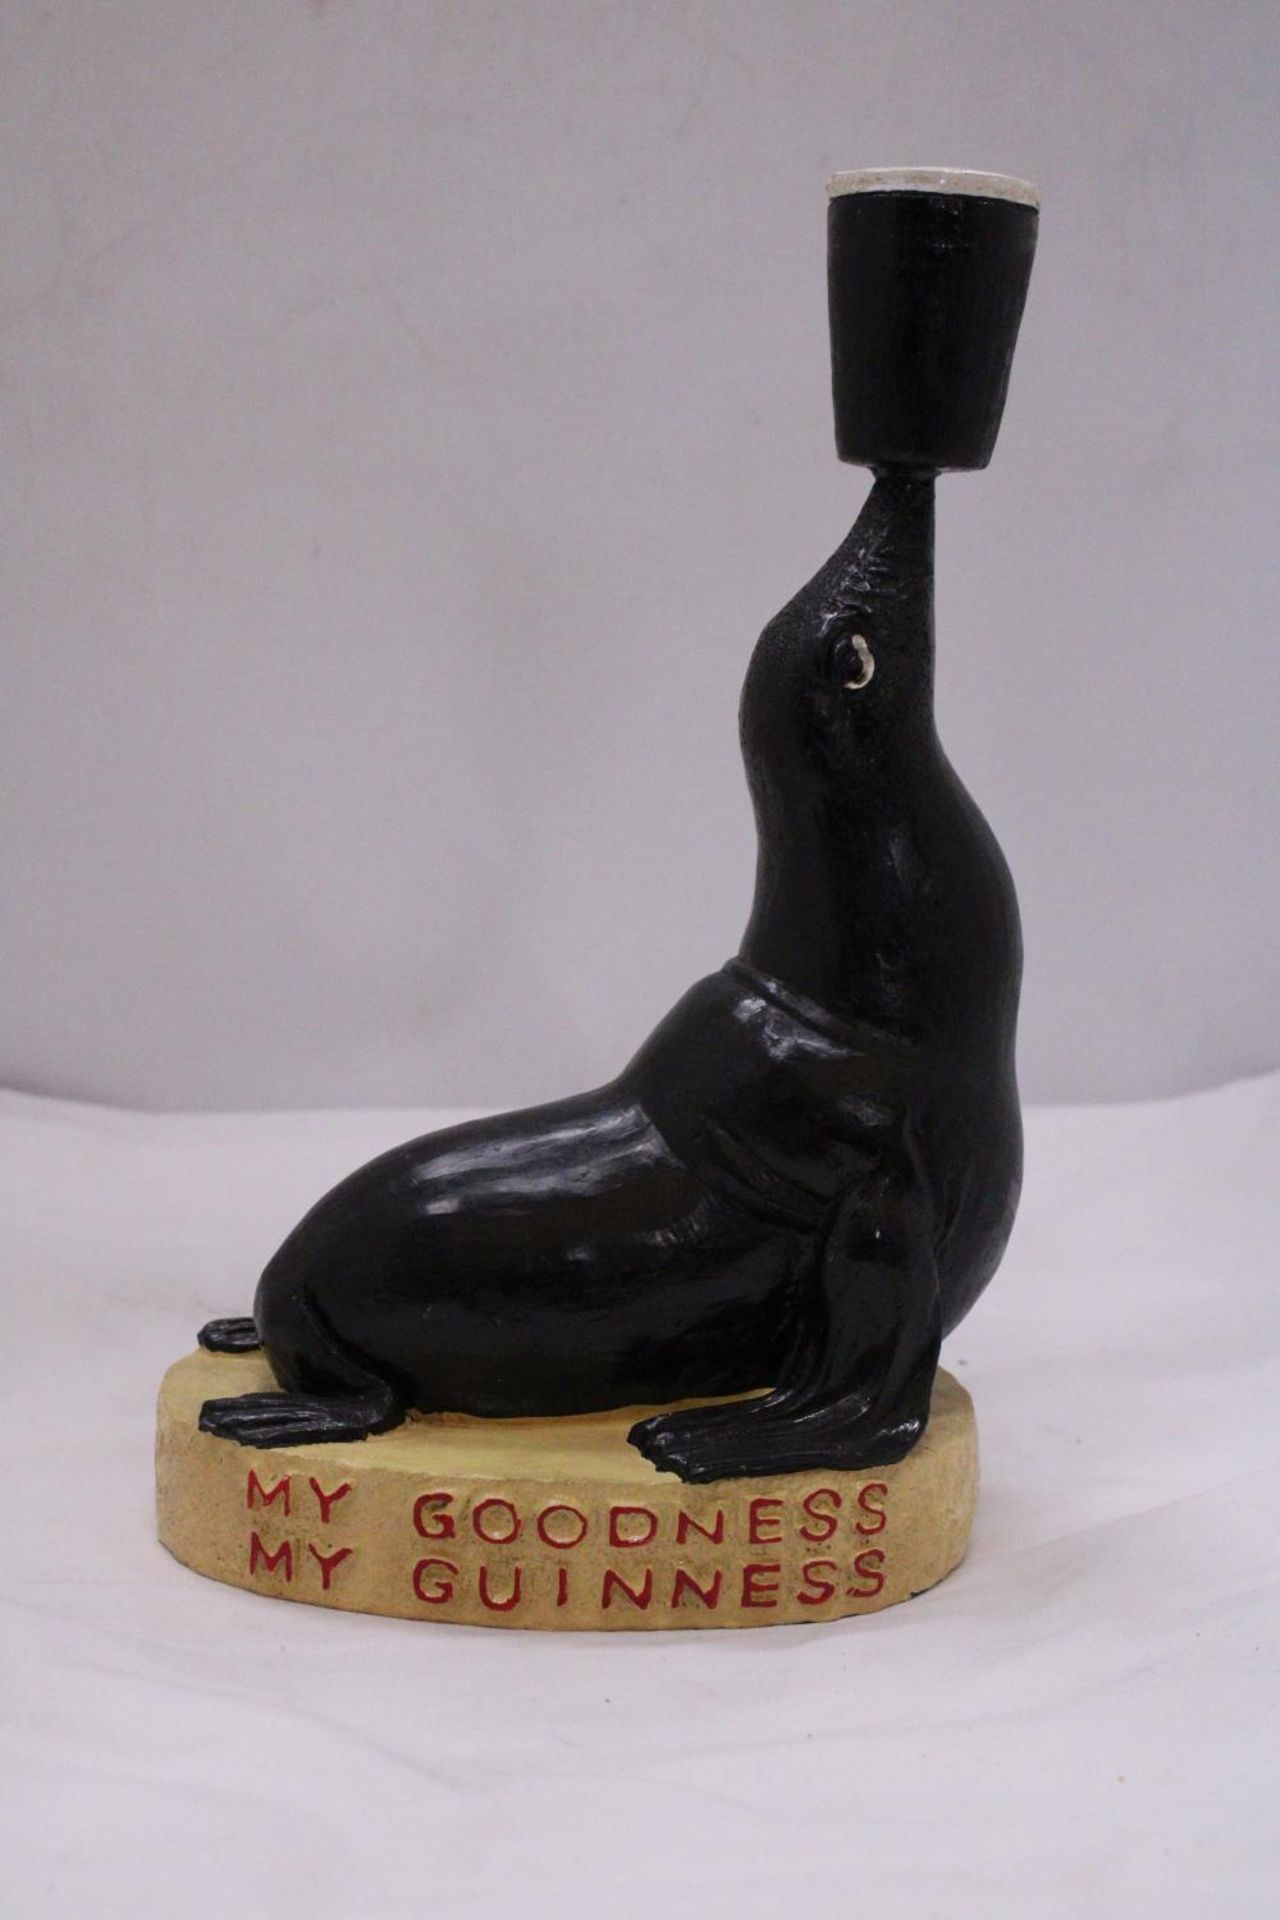 A MY GOODNESS MY GUINESS ADVERTISING RESIN SEAL APPROXIMATELY 11.5" TALL - Image 4 of 5